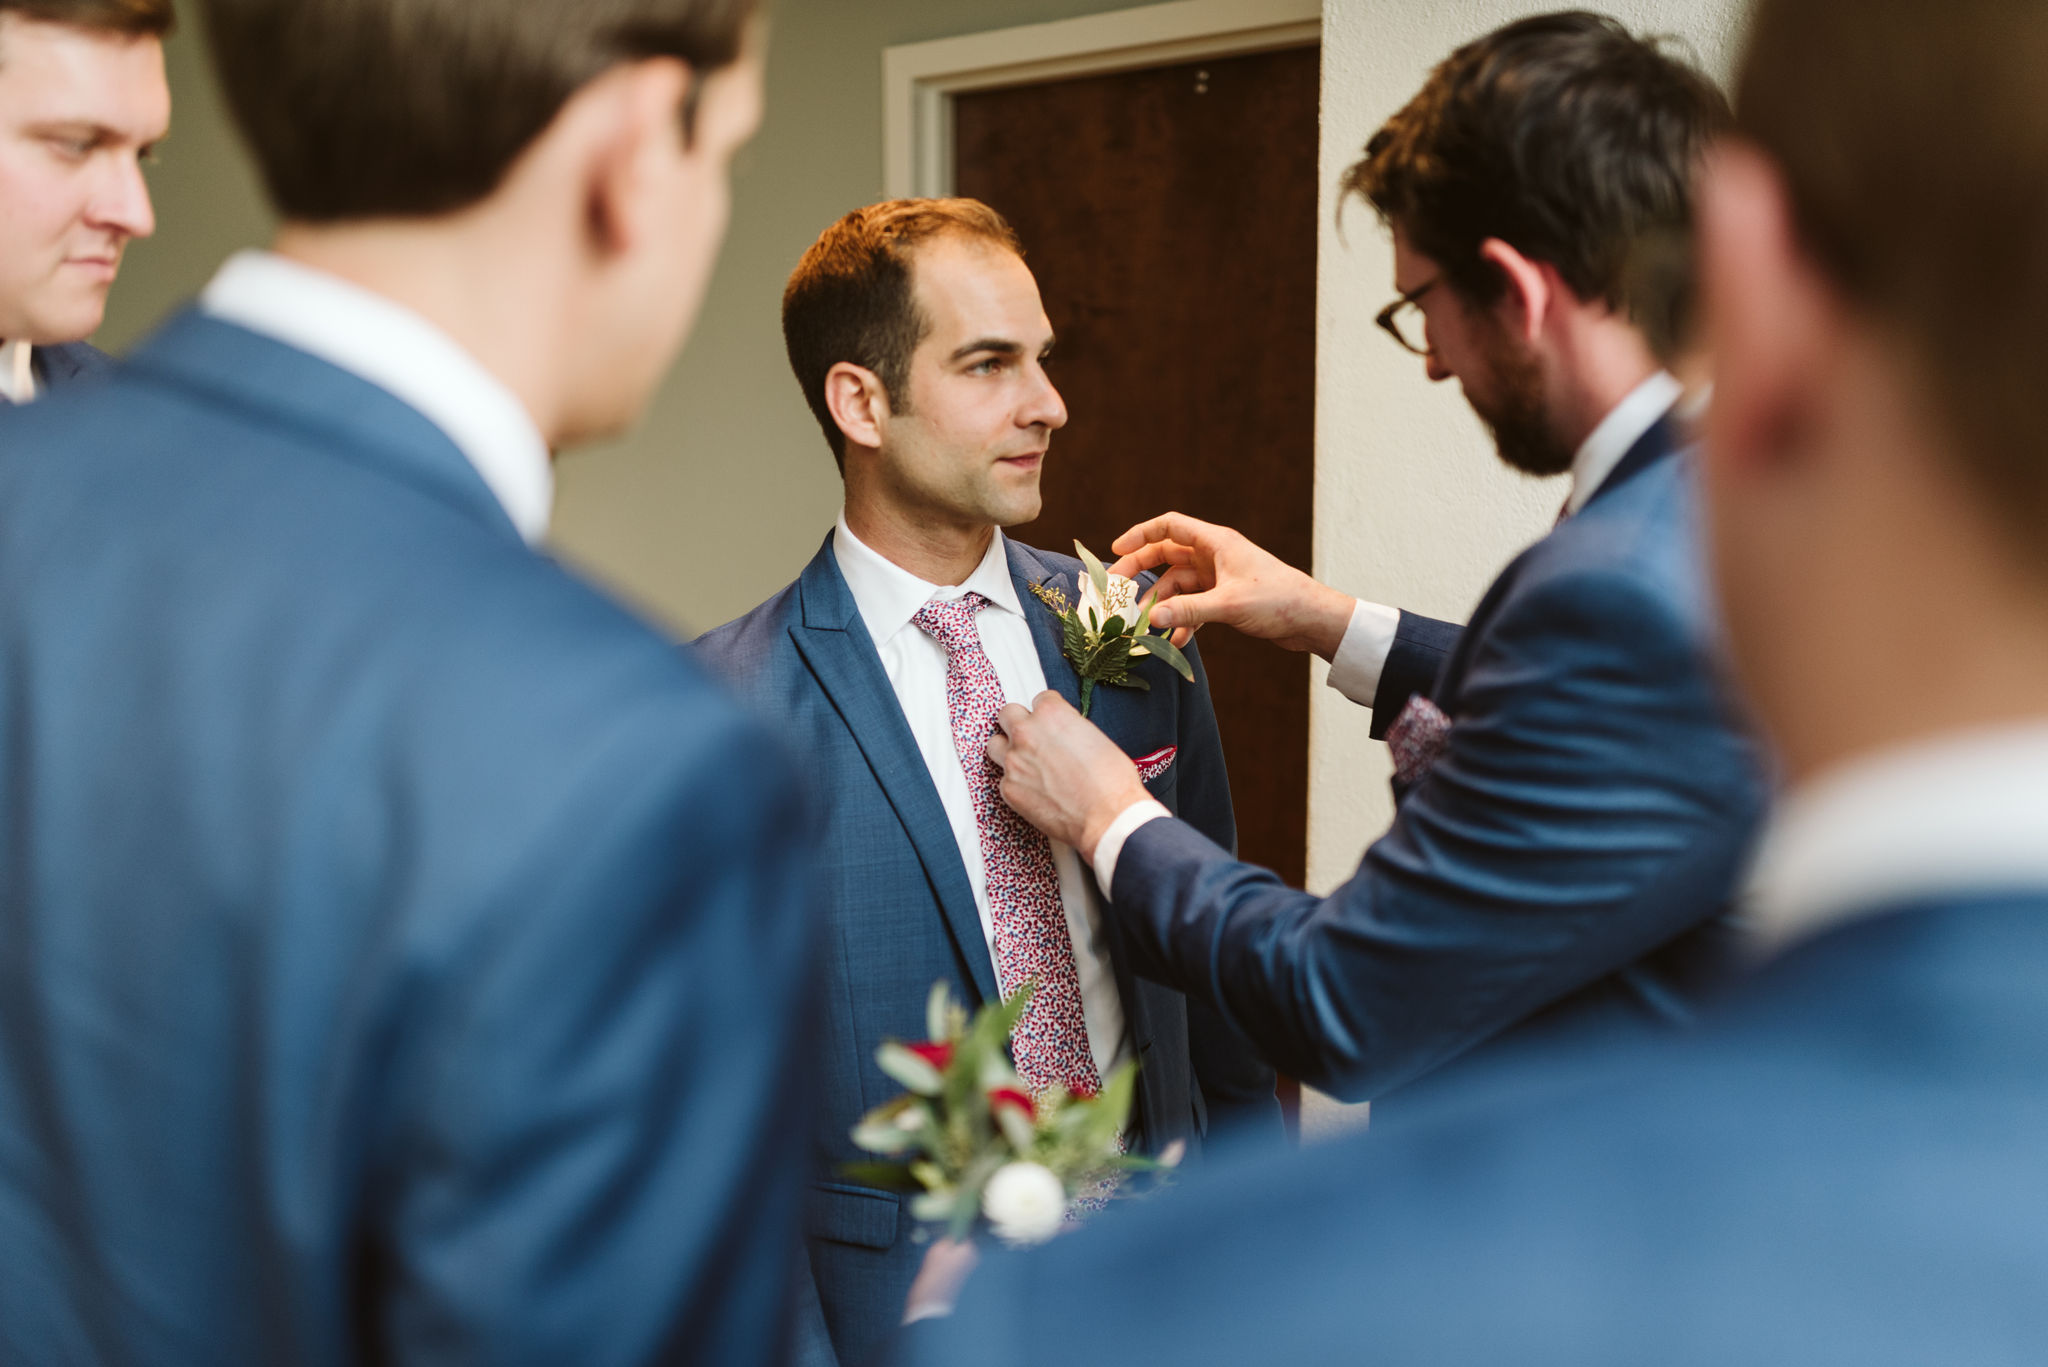  Phoenix Maryland, Baltimore Wedding Photographer, Eagle’s Nest Country Club, Classic, Romantic, Spring, Generation Tux, Knotty Tie, Groom and Groomsmen Getting Ready 